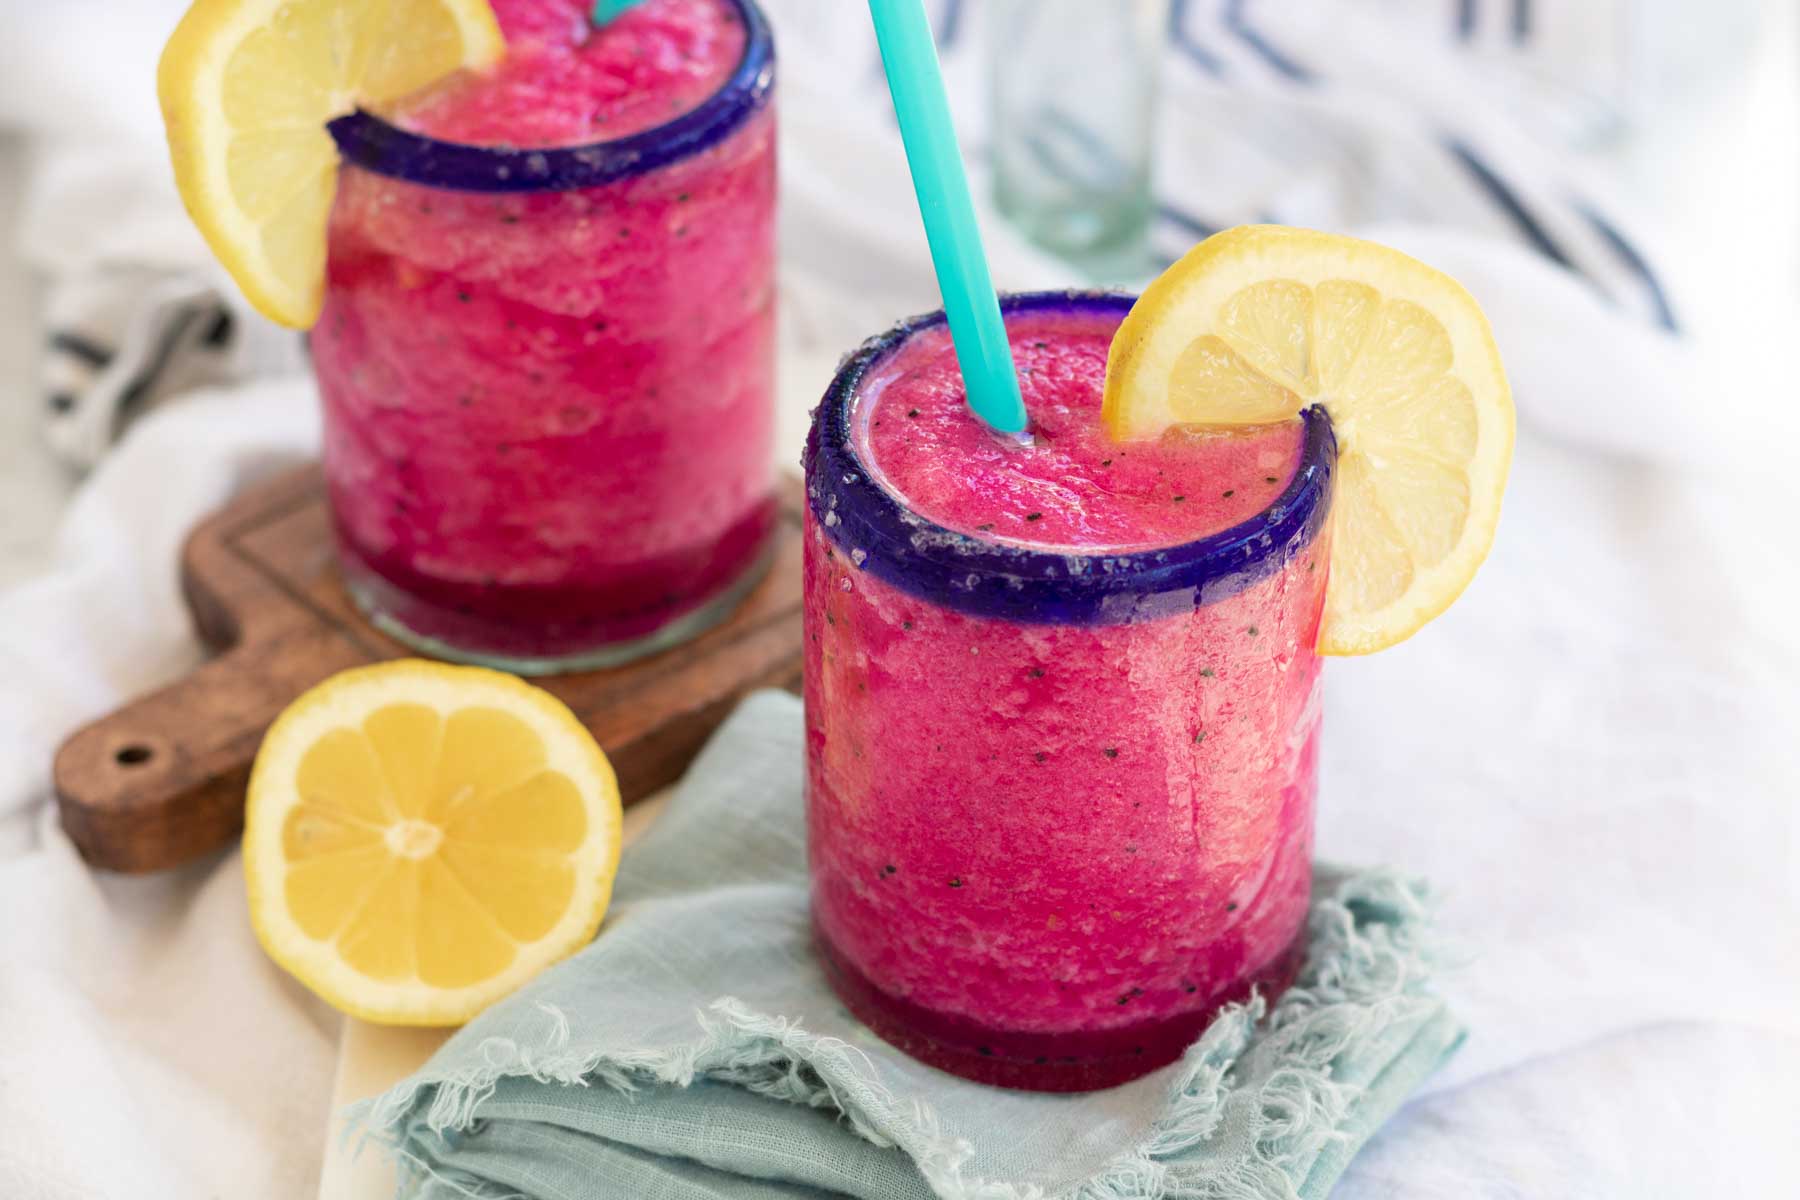 A bright pink blended margarita in a blue-rimmed glass with a blue straw and lemon garnish.